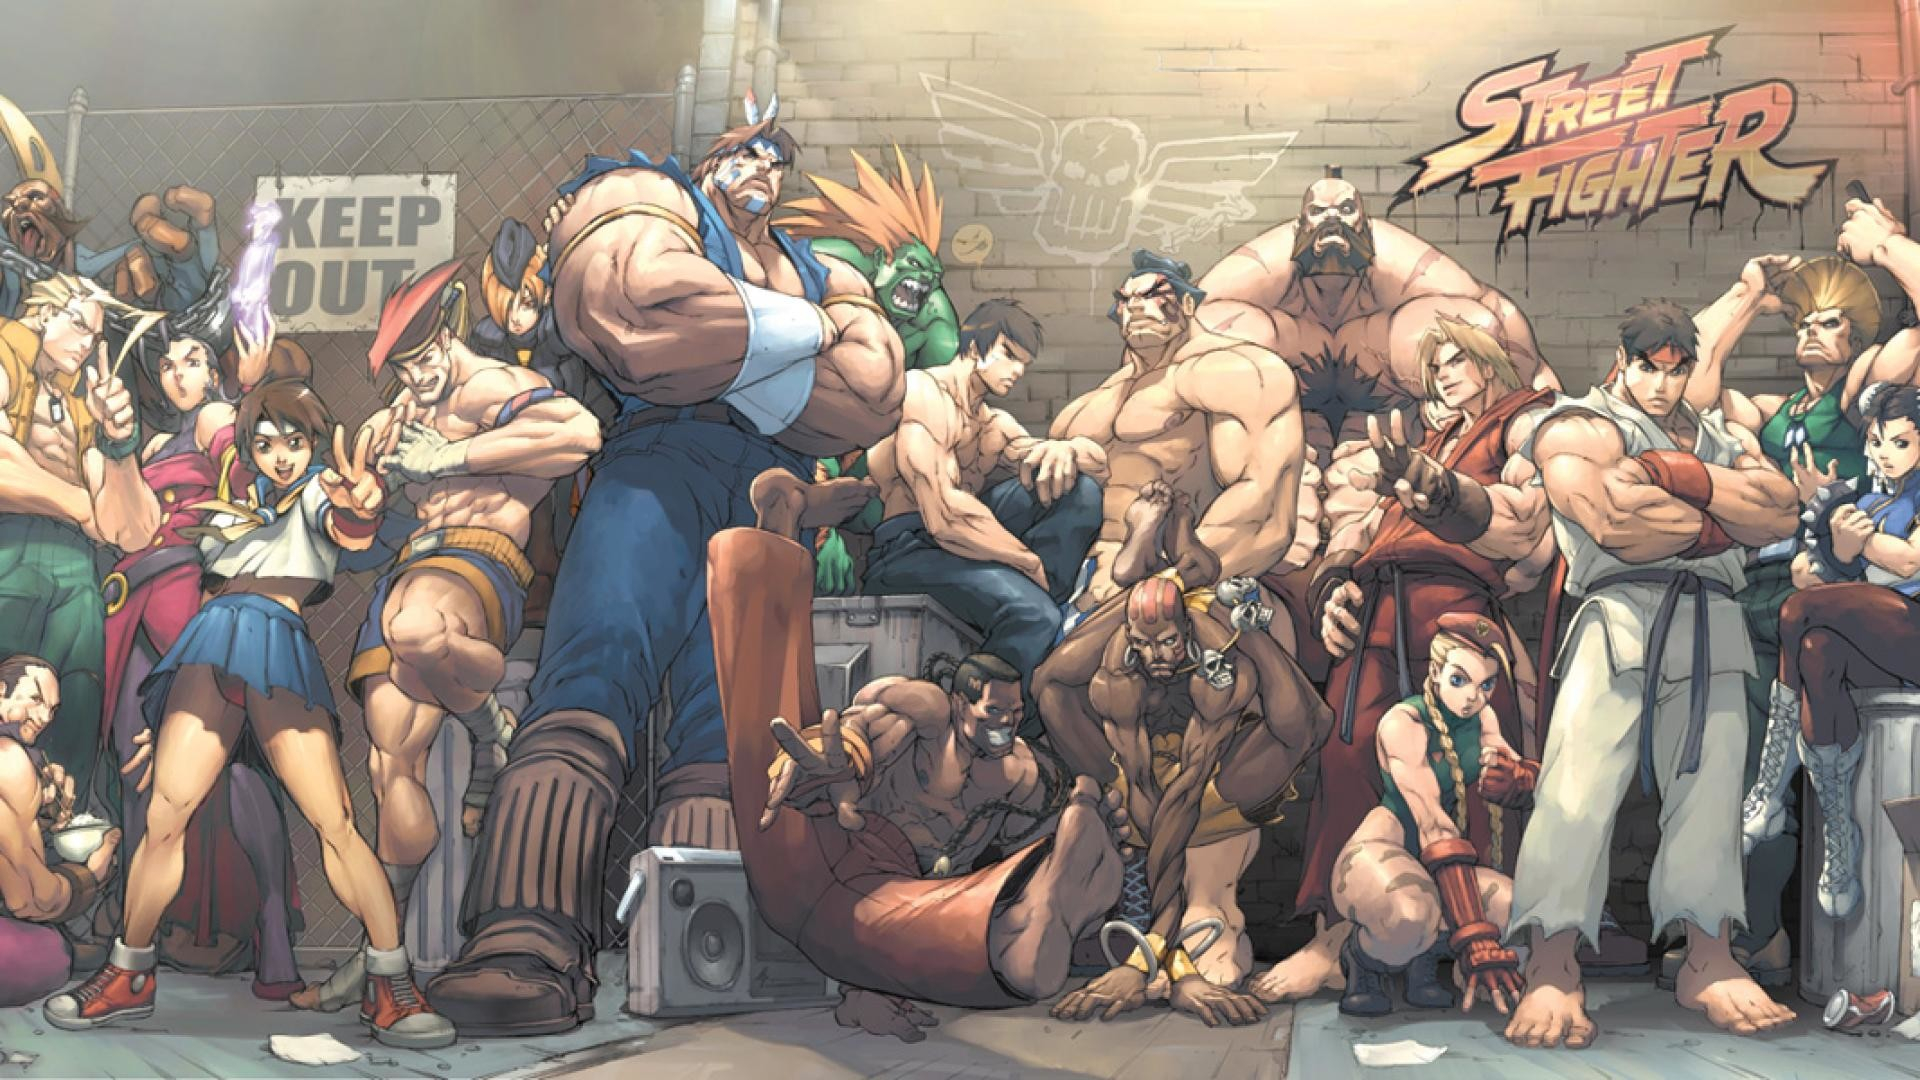 1920x1080 Street Fighter 4 Wallpapers (67+ pictures